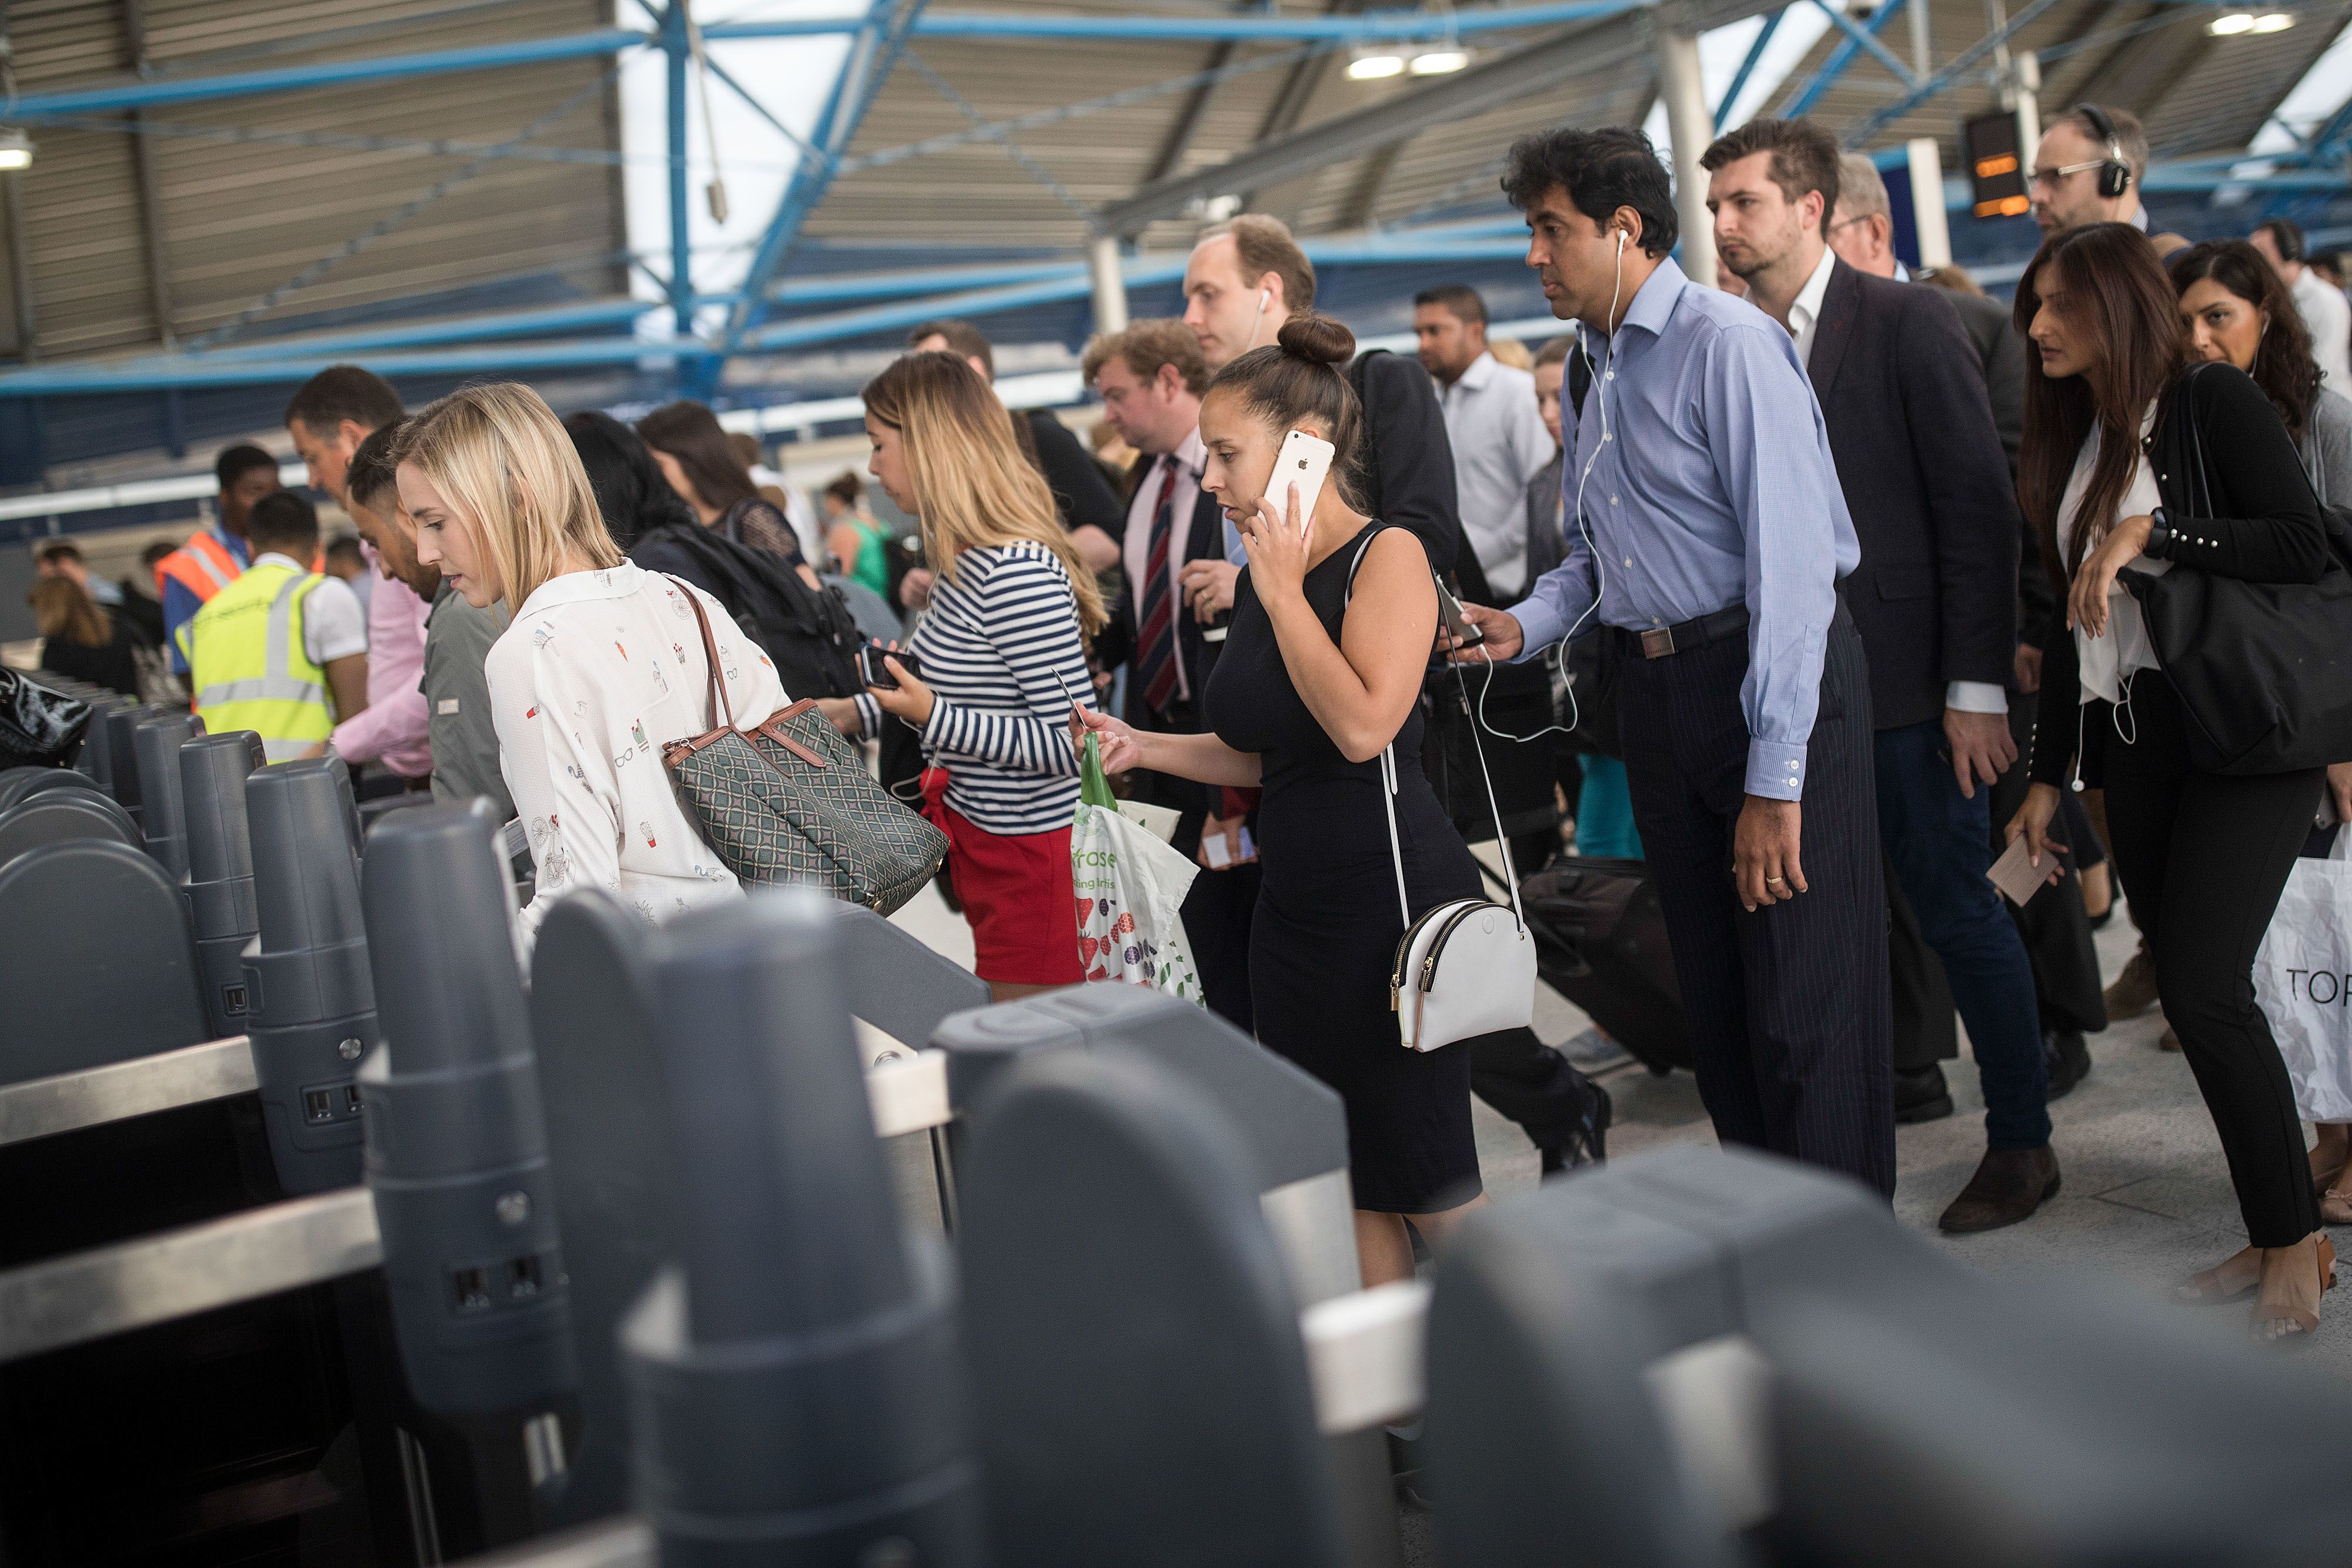 Smartphones, sensors could spell end to ticket lines at transport hubs